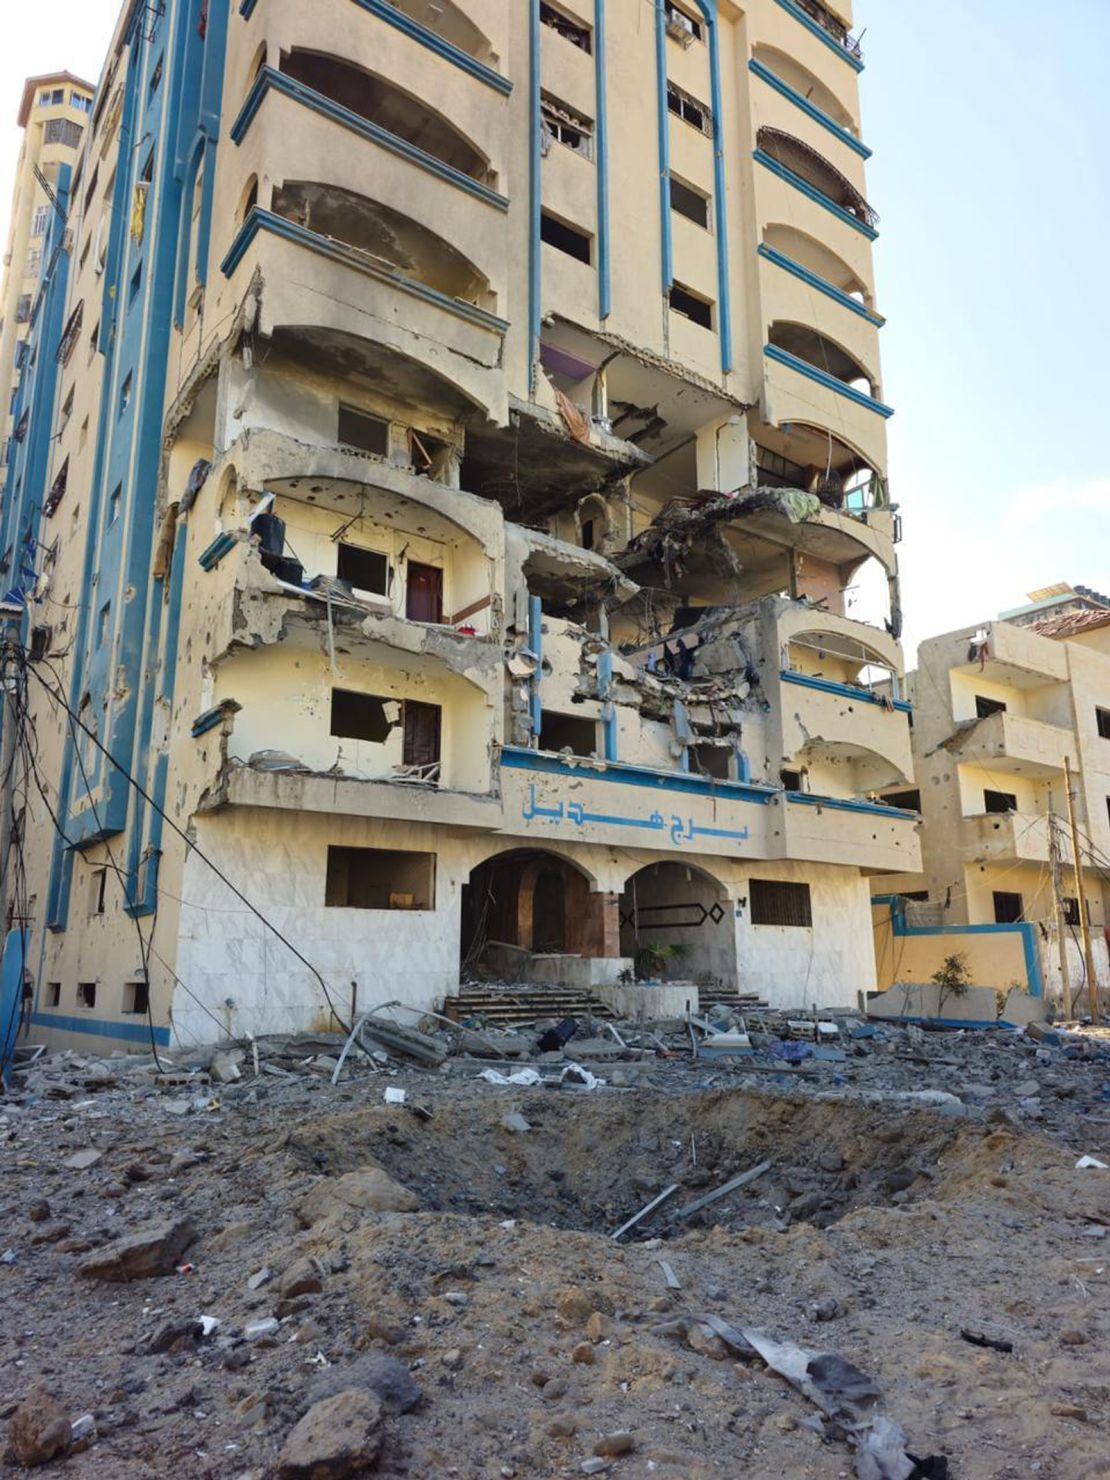 A destroyed apartment building in Gaza City.